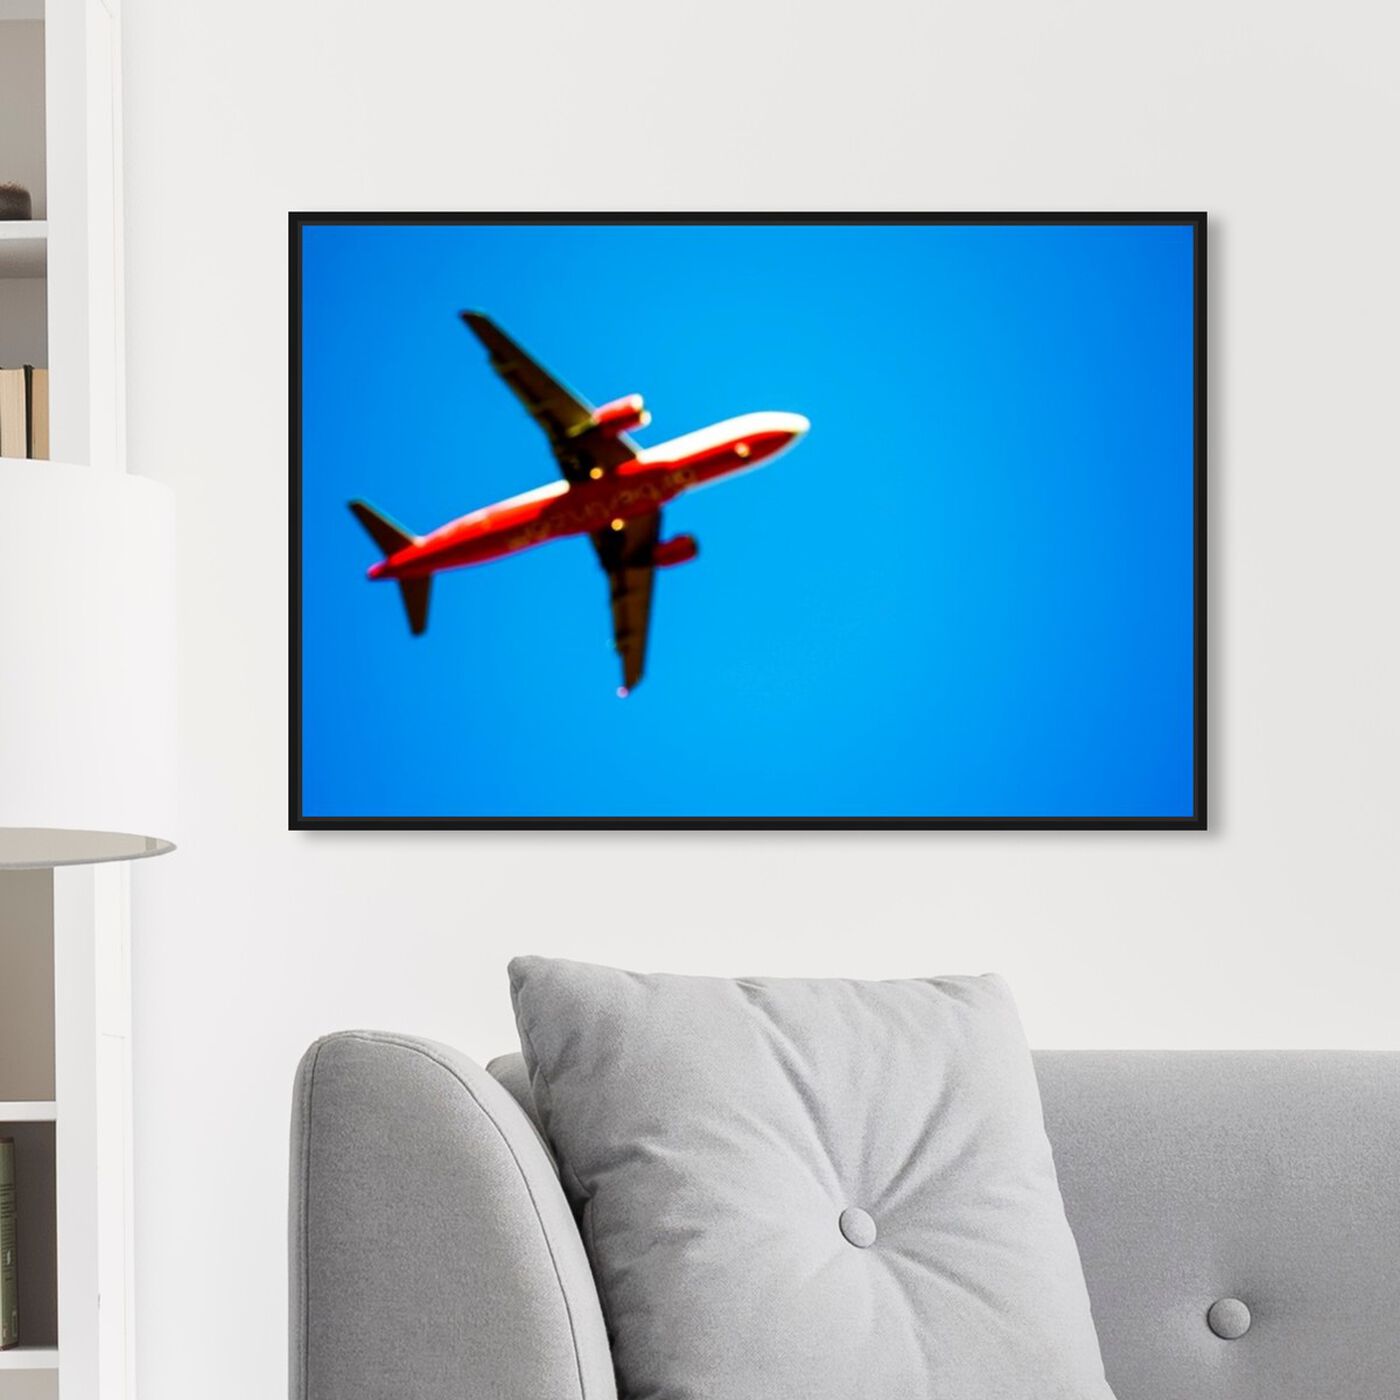 Hanging view of Blurry Plane featuring transportation and air transportation art.